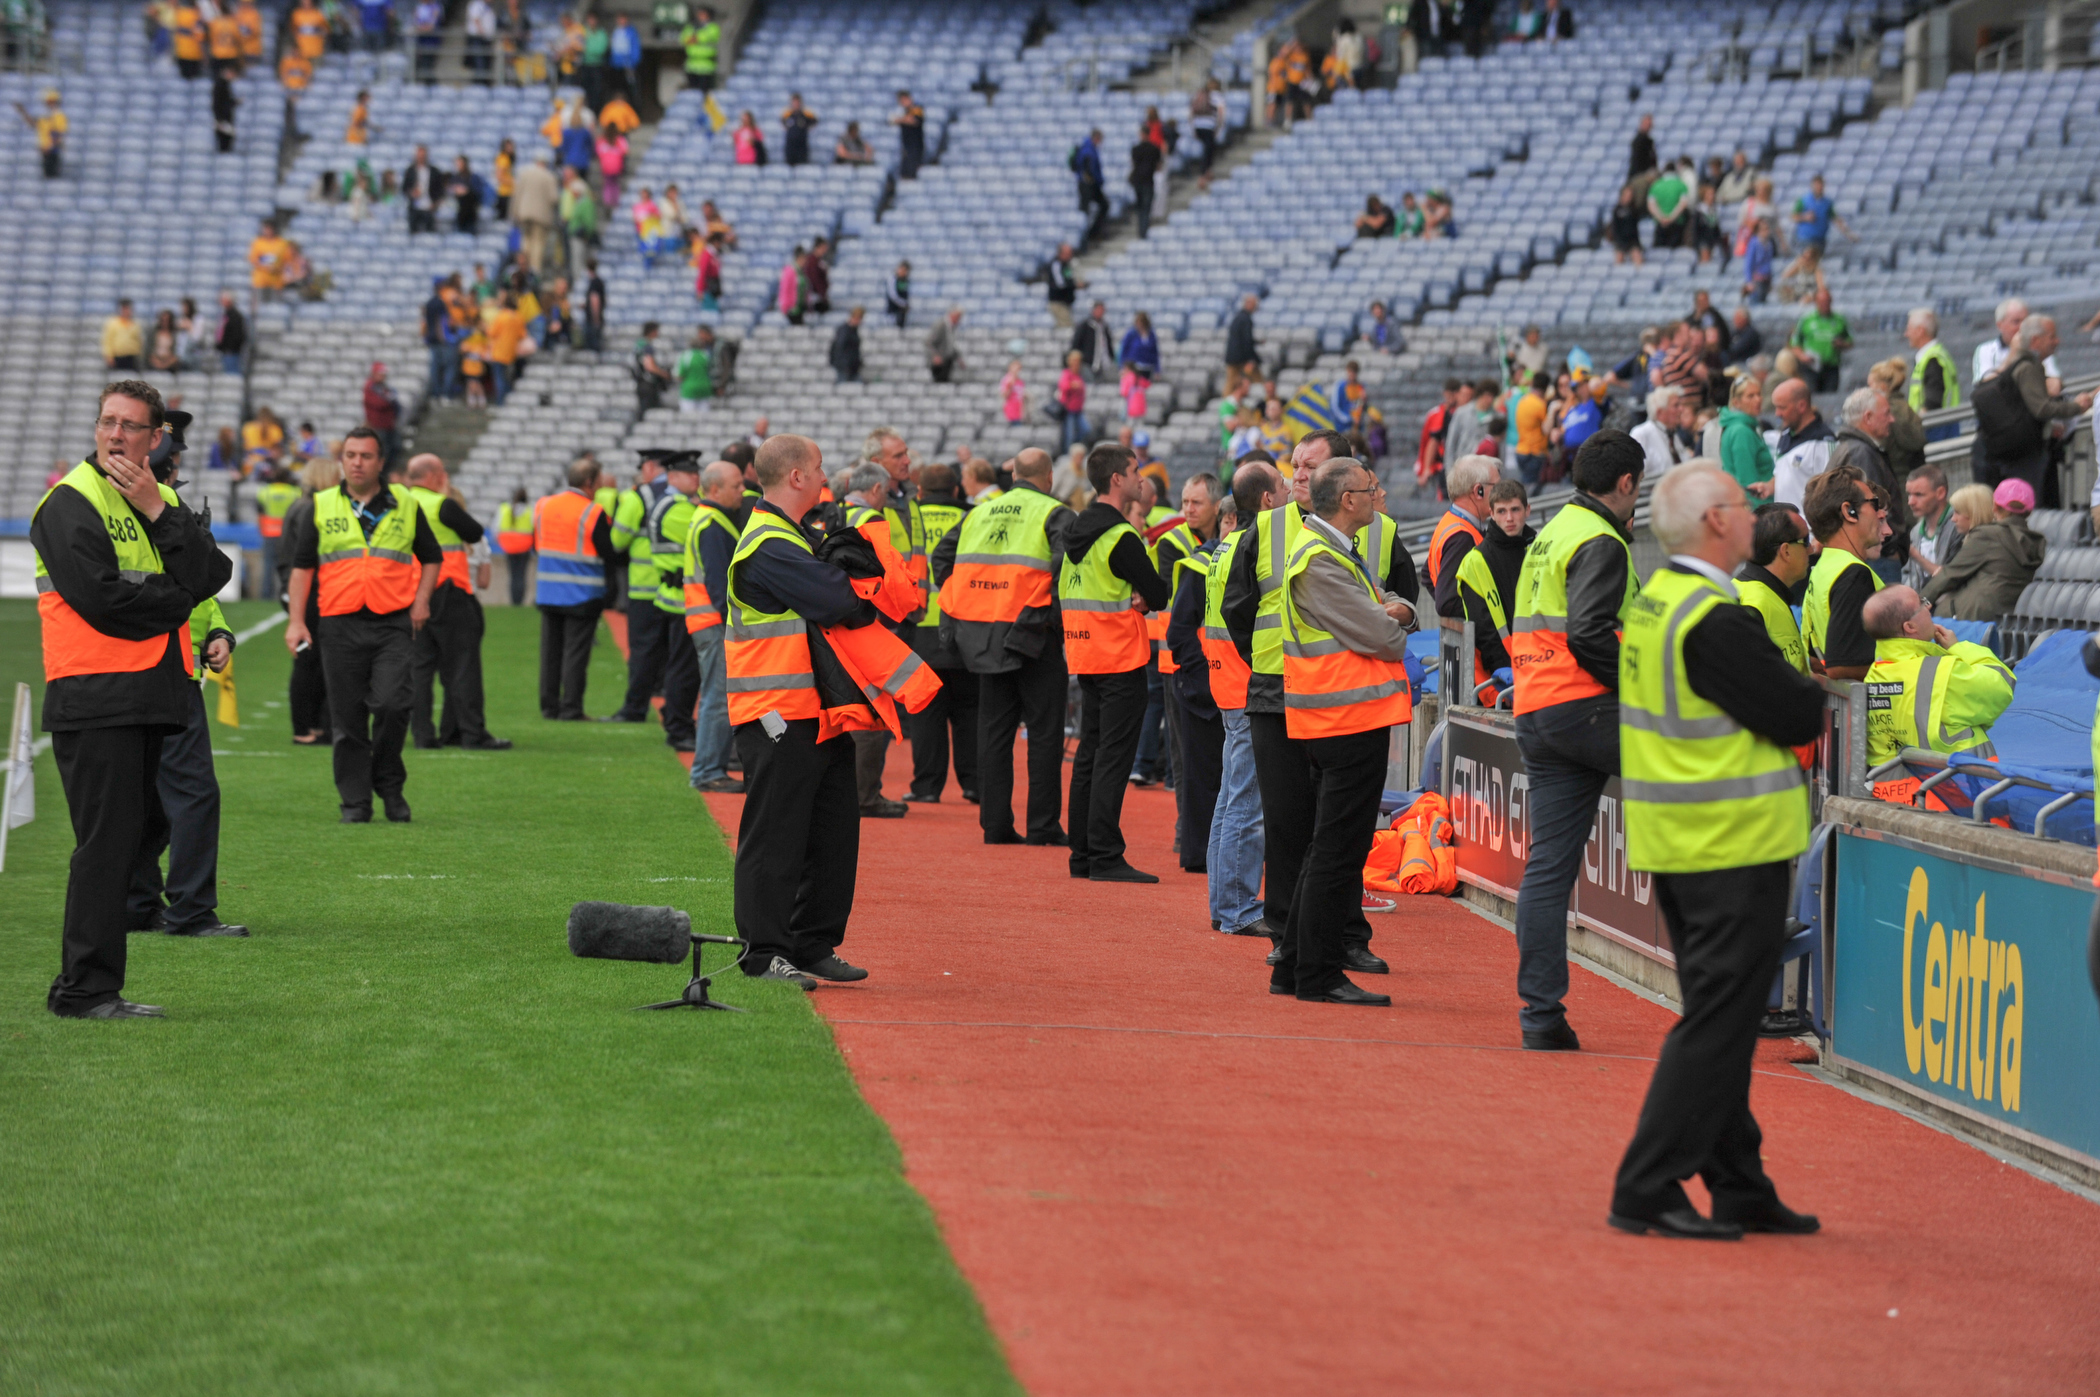 18th August, 2013, Croke Park Dublin. The 2013 All-Ireland Senior Hurling Semi-final between Limerick and Clare. Pictured are stewards in the stadium. (Photo: Barry Cronin)